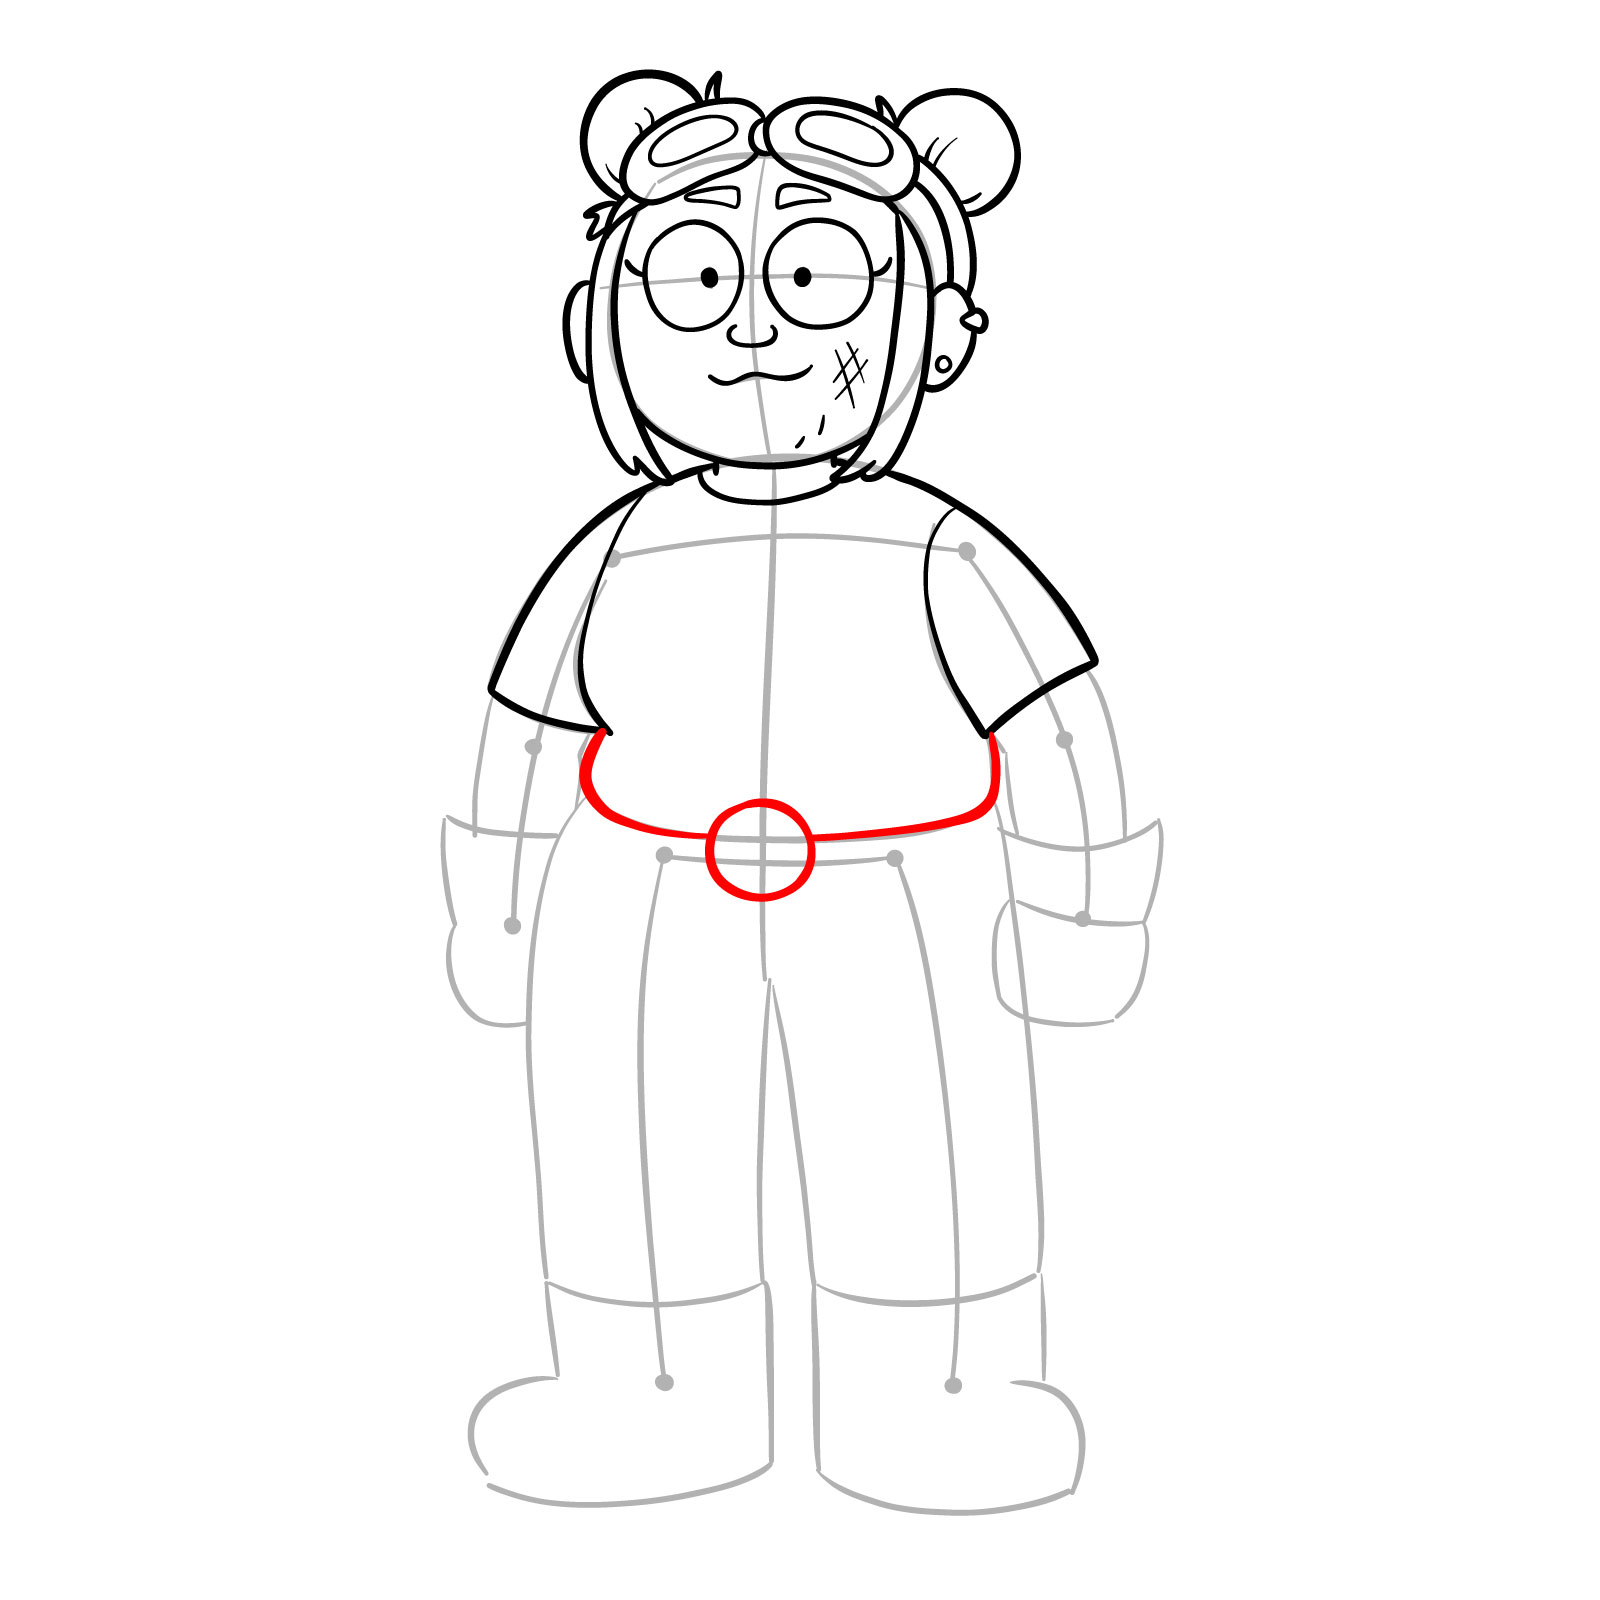 How to draw Jess from Amphibia - step 10